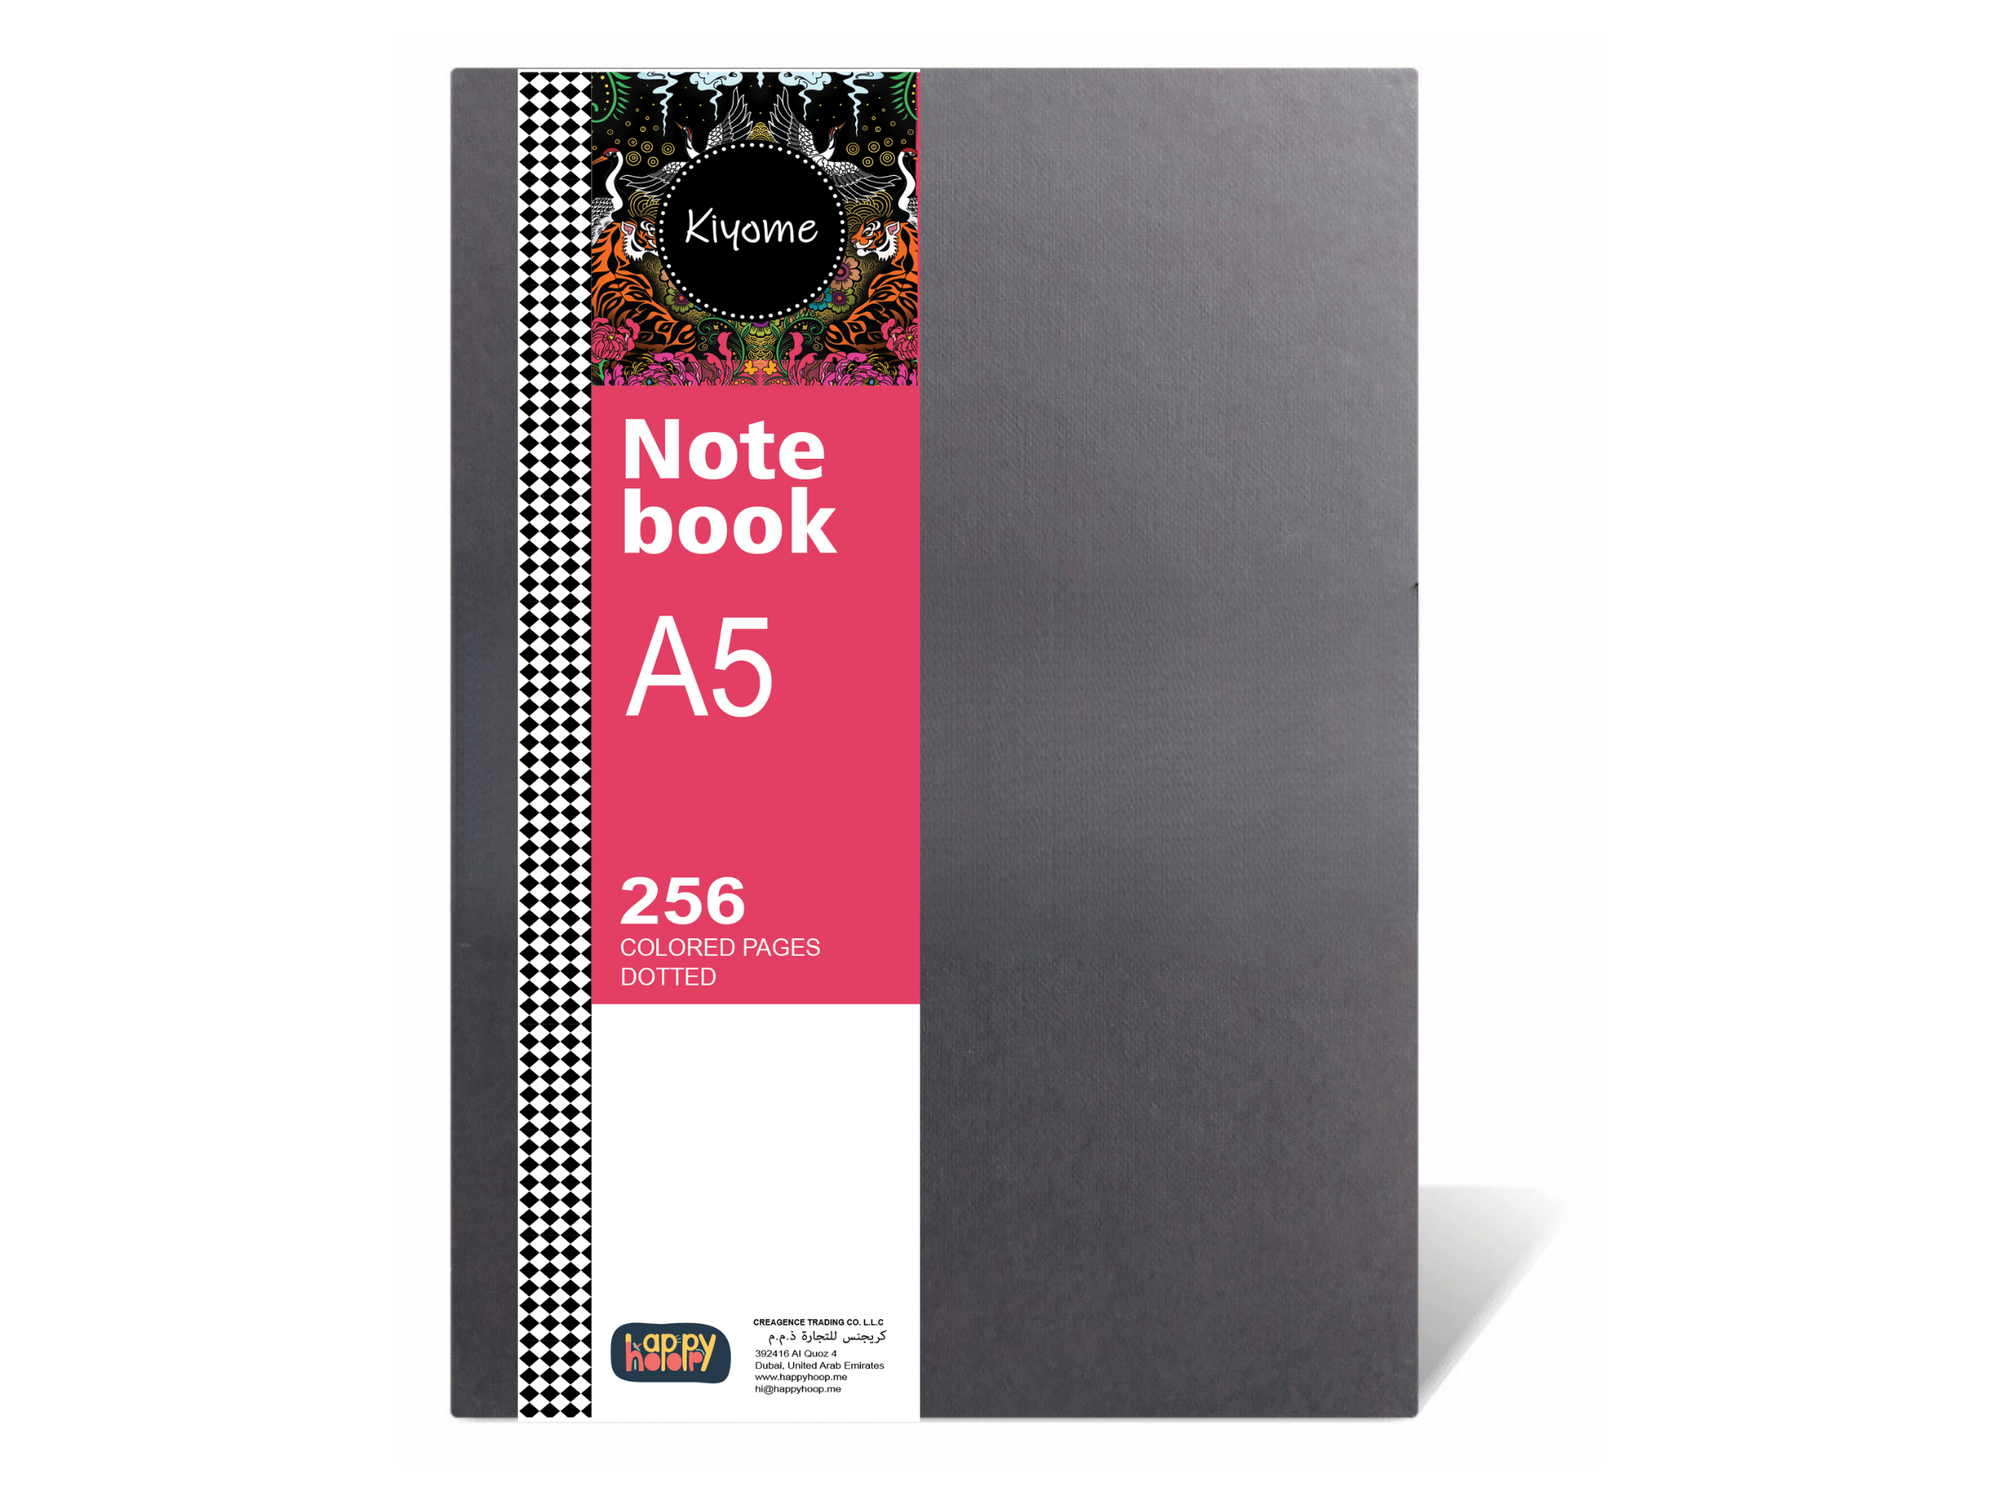 Kiyome Notebook | A5 | 256 Coloured Pages | Dot Grid